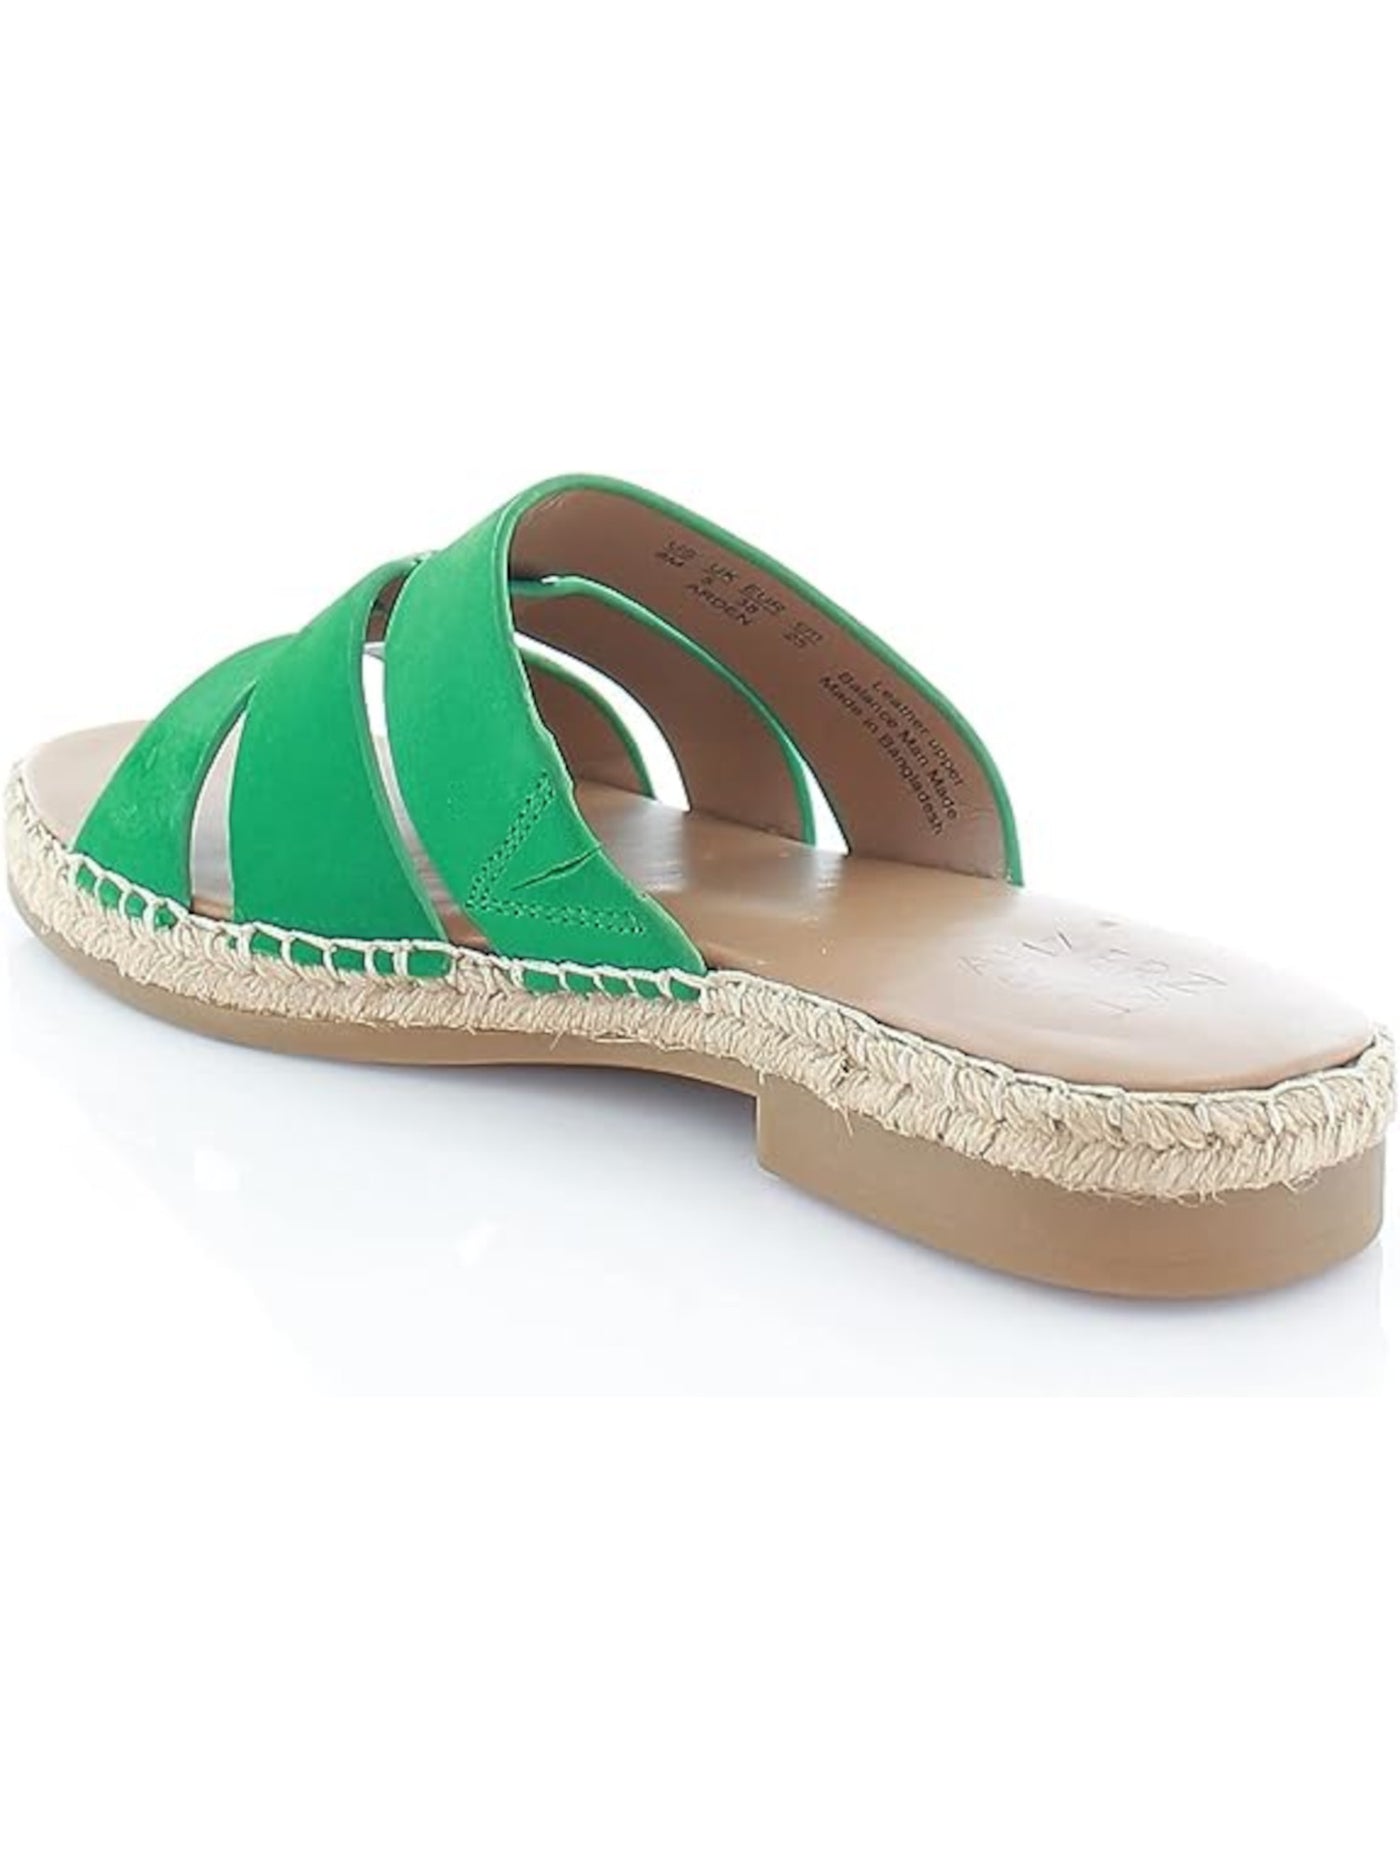 NATURALIZER Womens Green Cut Out Padded Arden Round Toe Block Heel Slip On Leather Slide Sandals Shoes 6.5 M